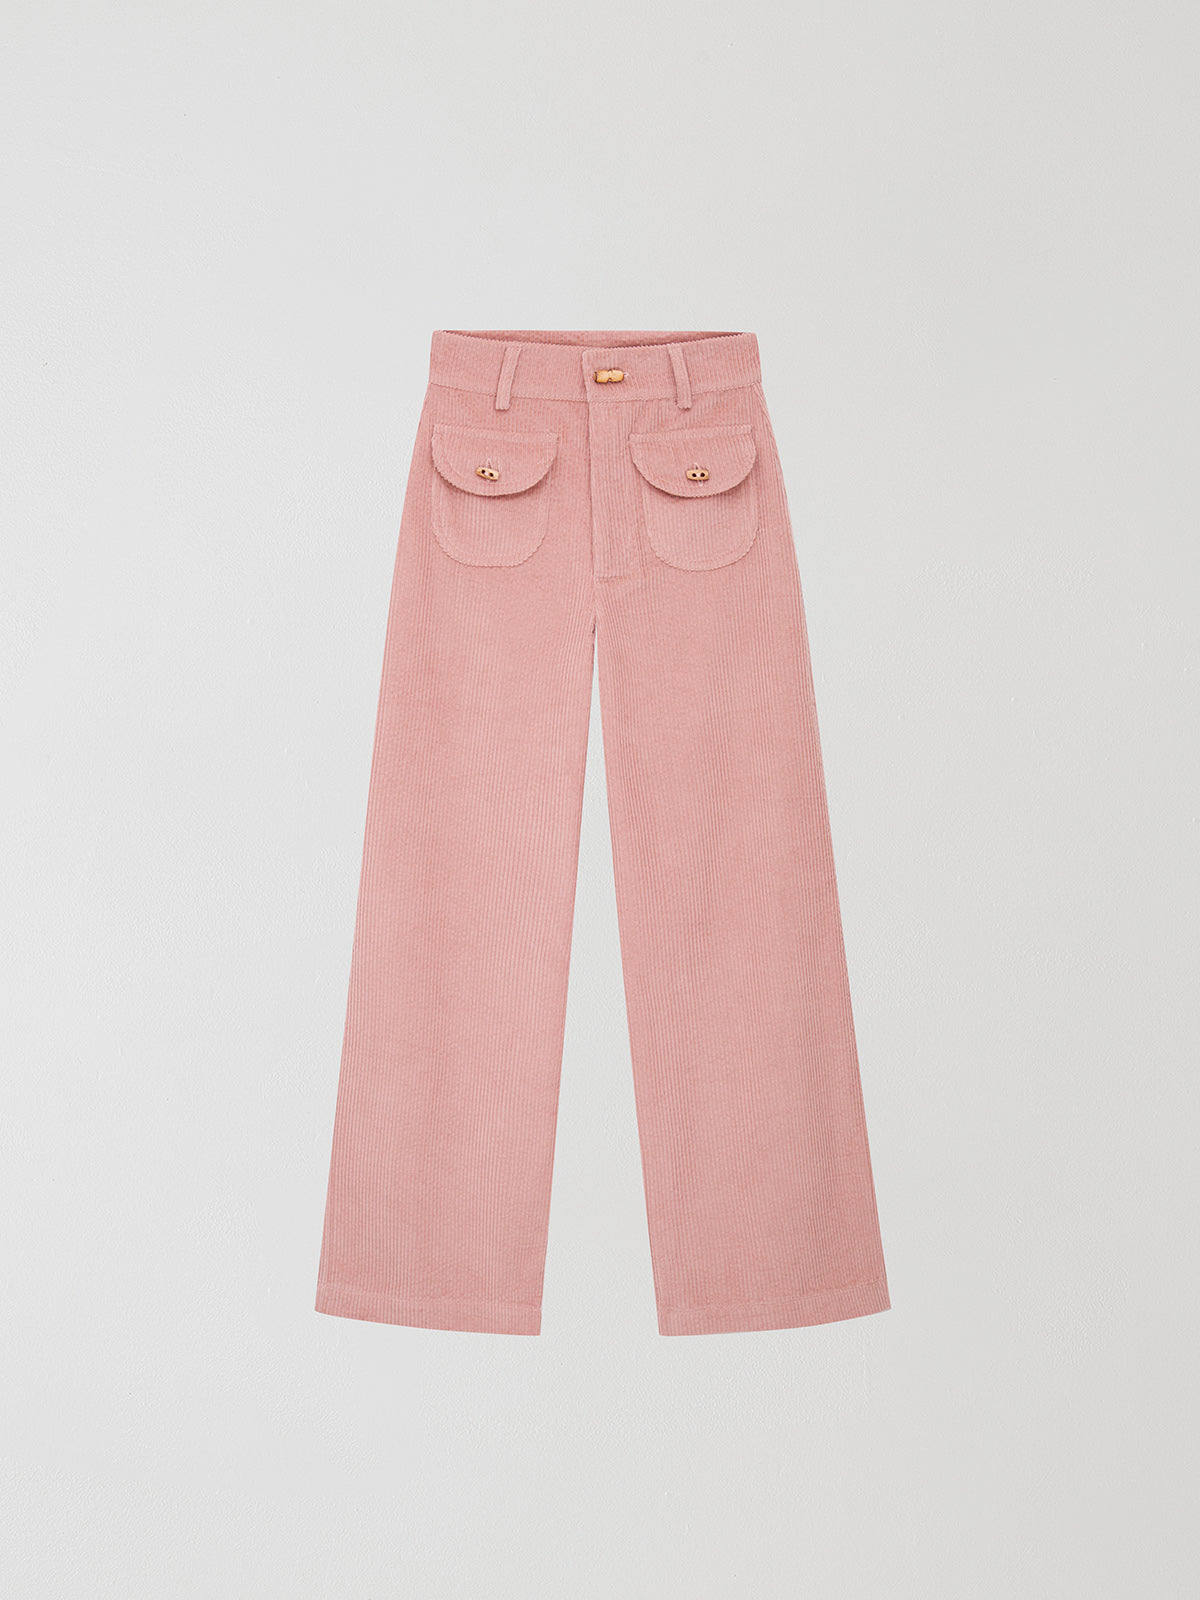 Baby pink high waisted corduroy trousers. 